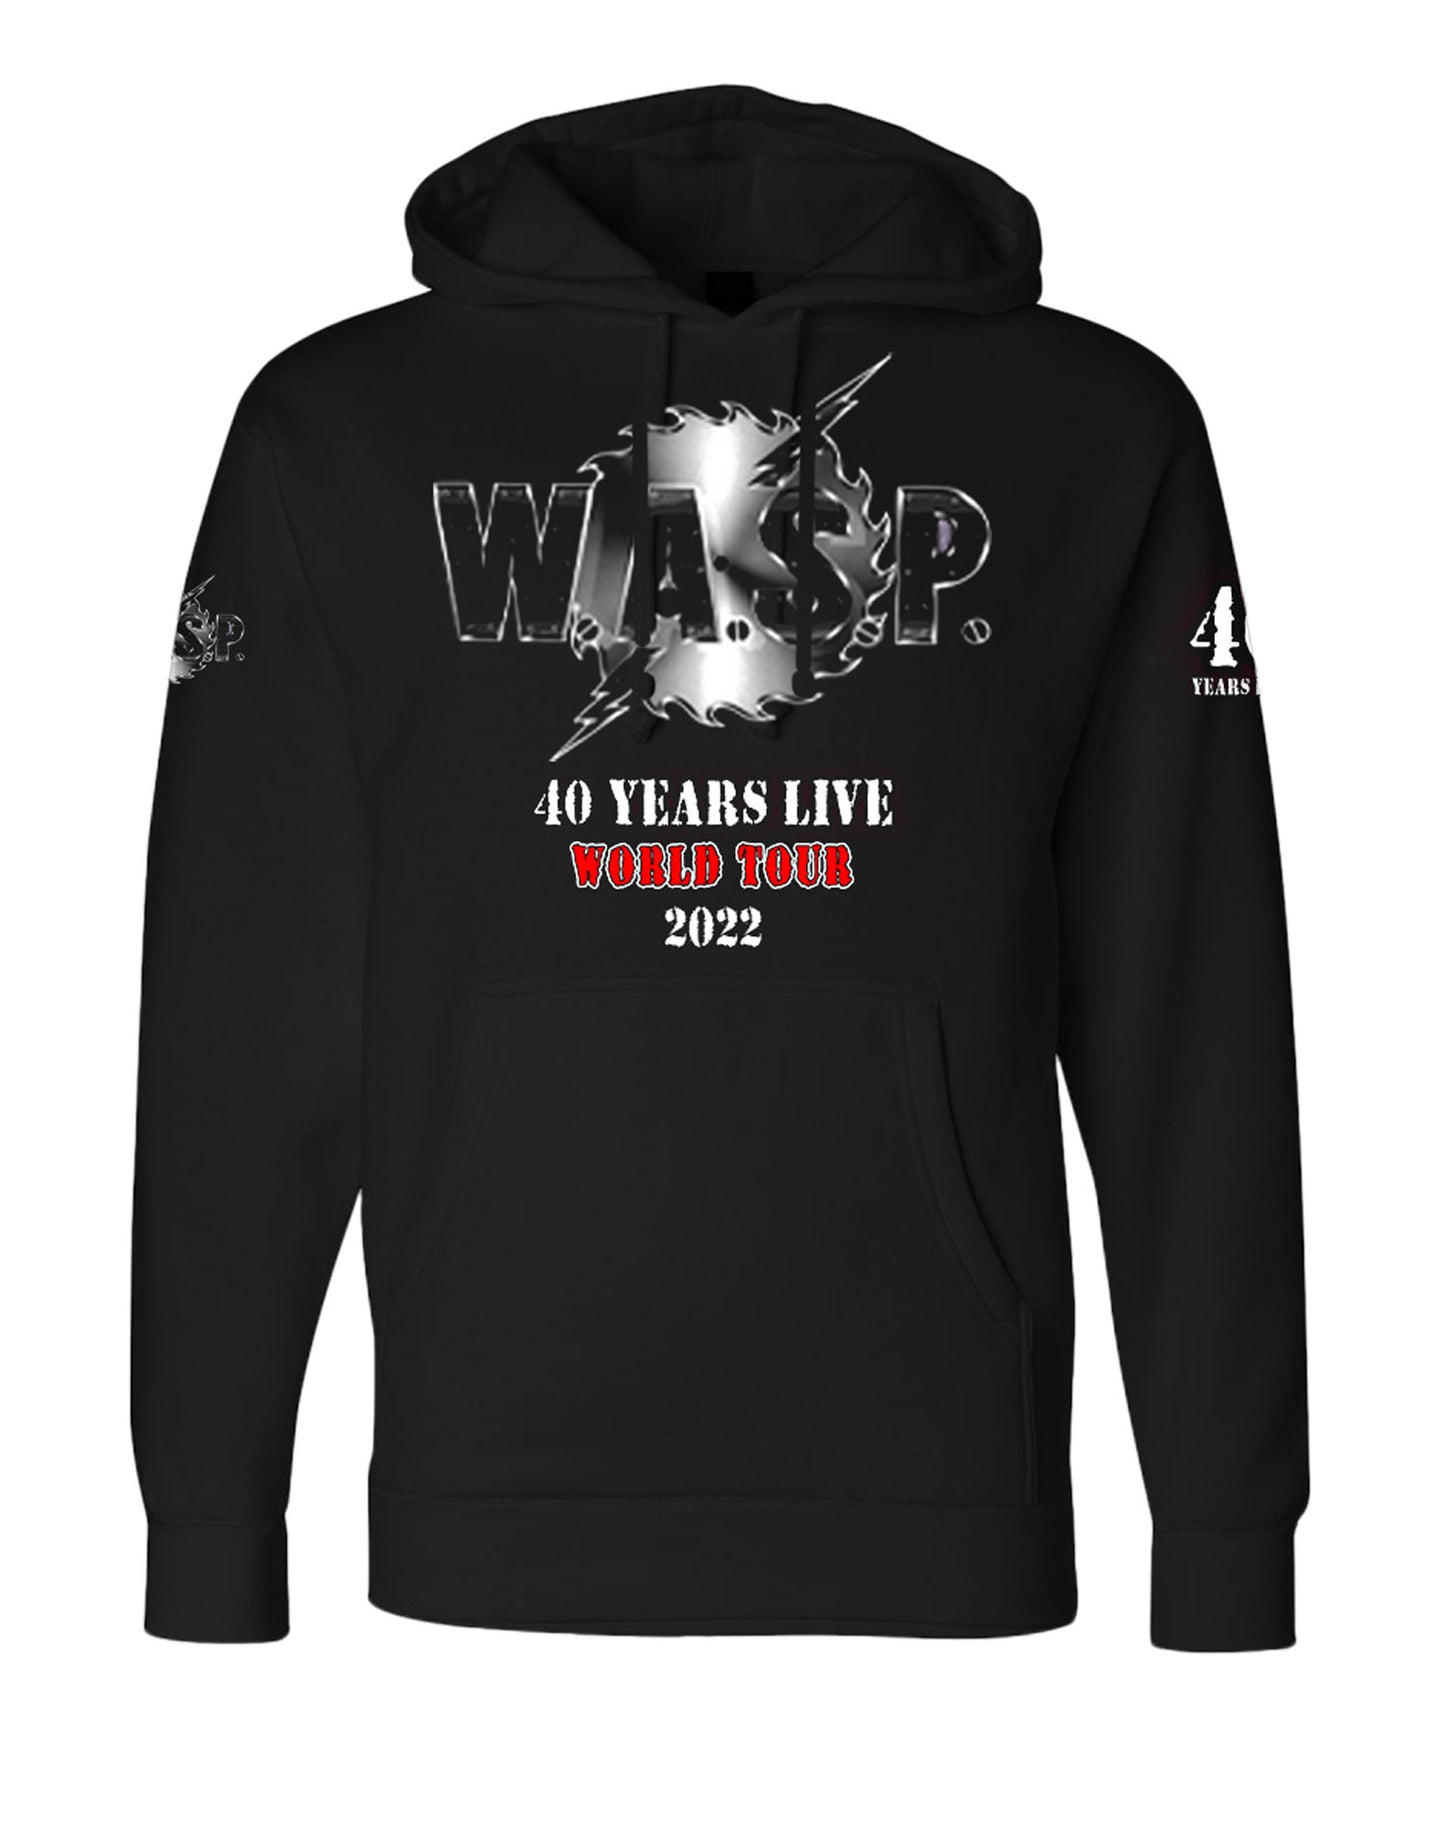 W.A.S.P "40 Years Live World Tour" Mens Hoodie